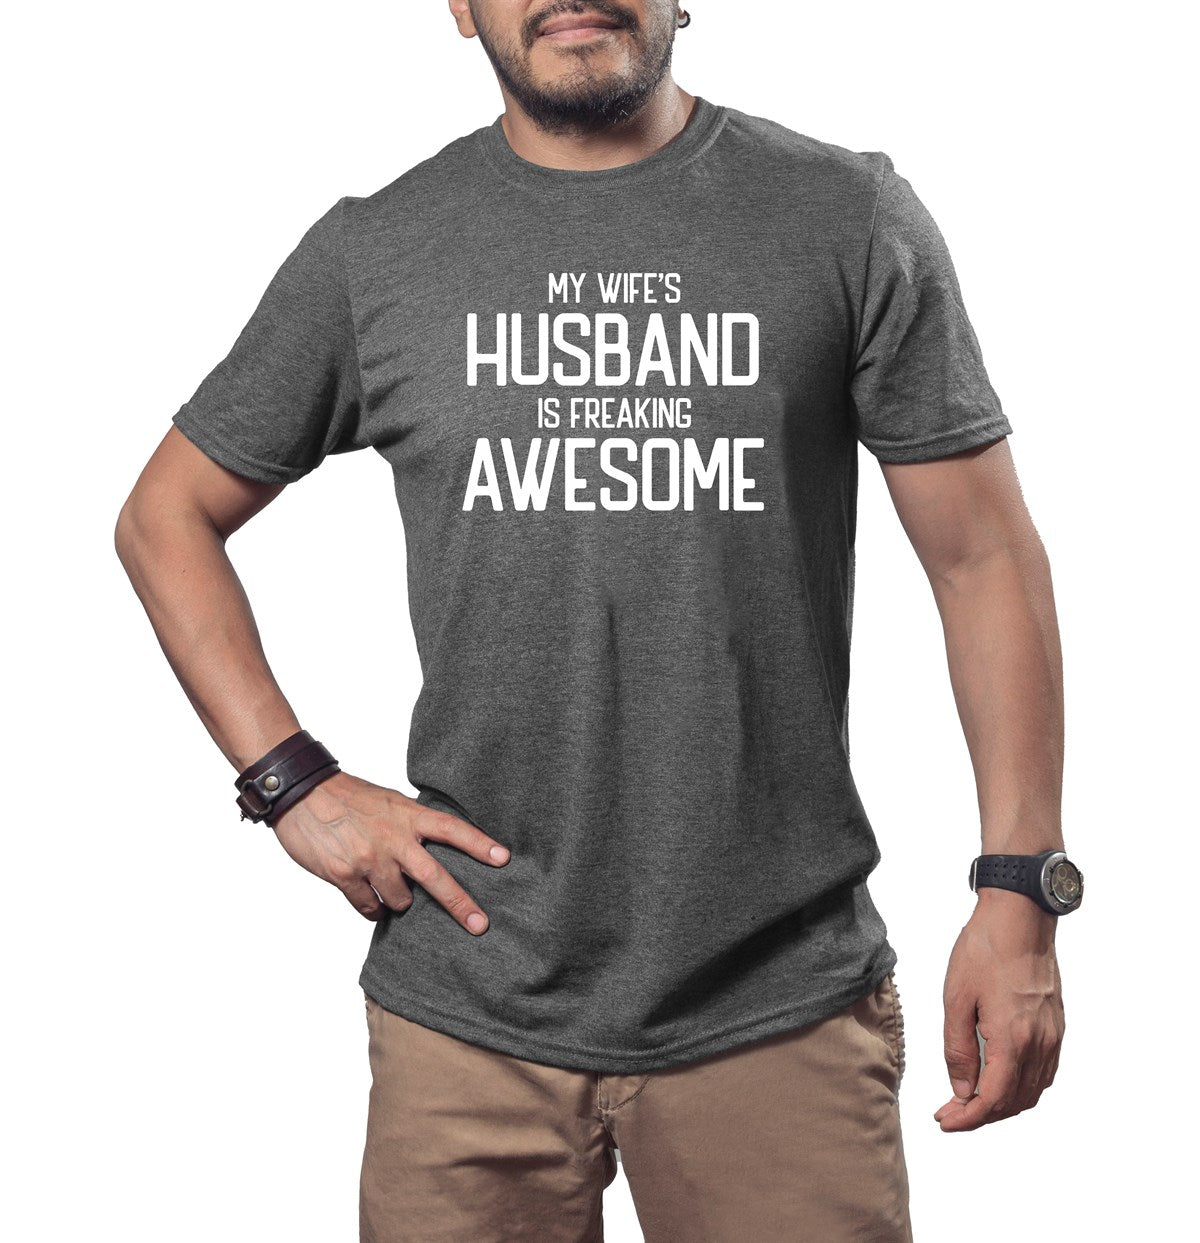 My Wife's Husband Is Freaking Awesome Tee